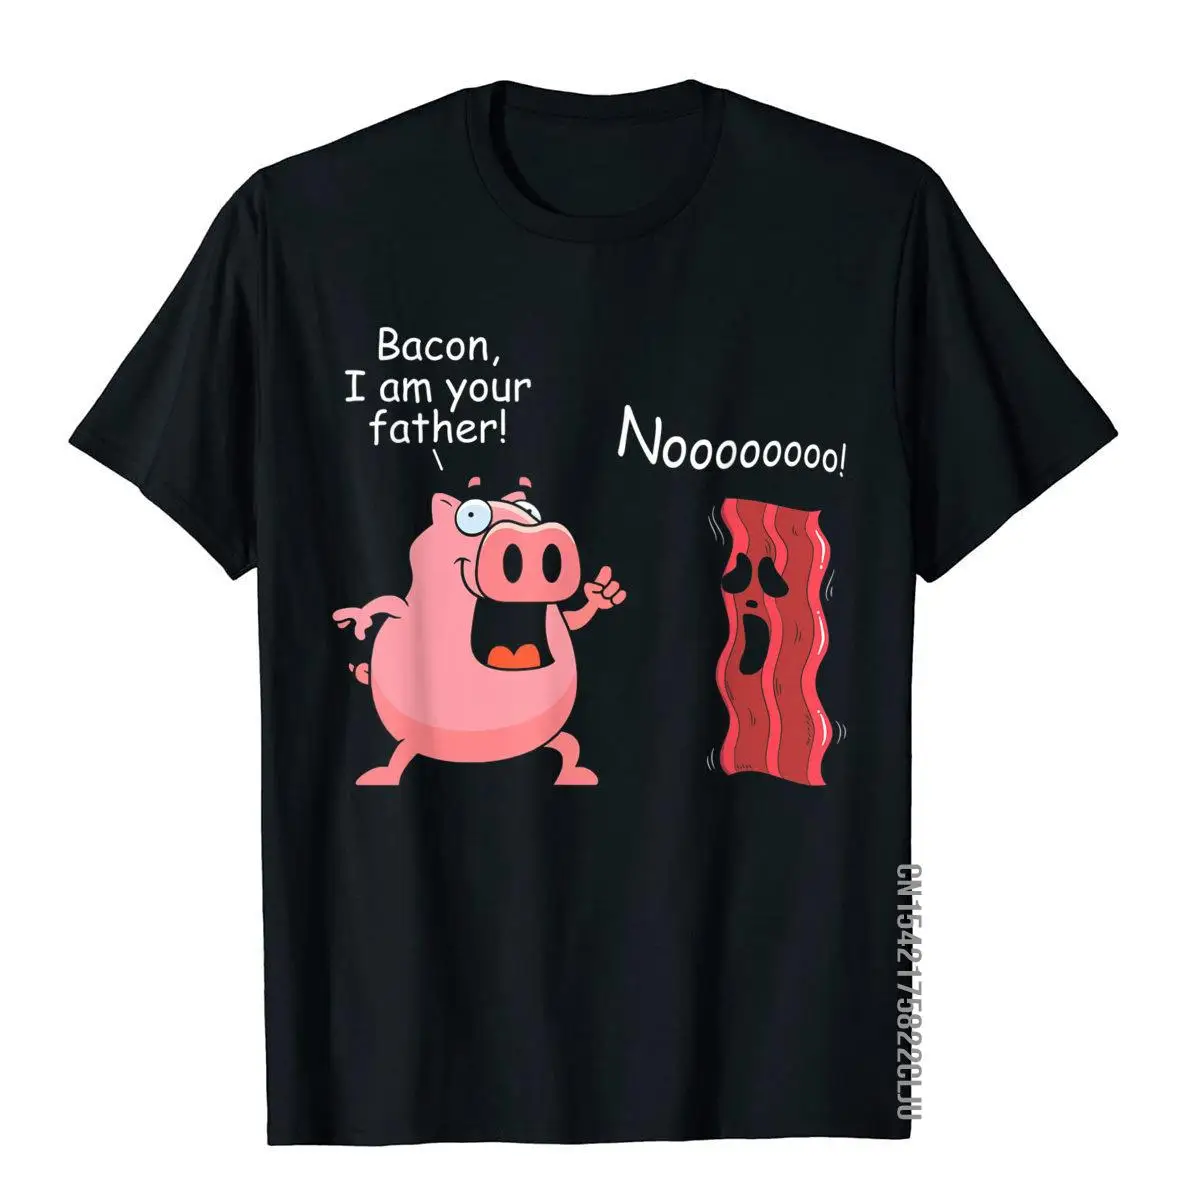 

Bacon I Am Your Father Funny Bacon Shirt Cotton Tees For Men Unique Top T-Shirts Group Latest